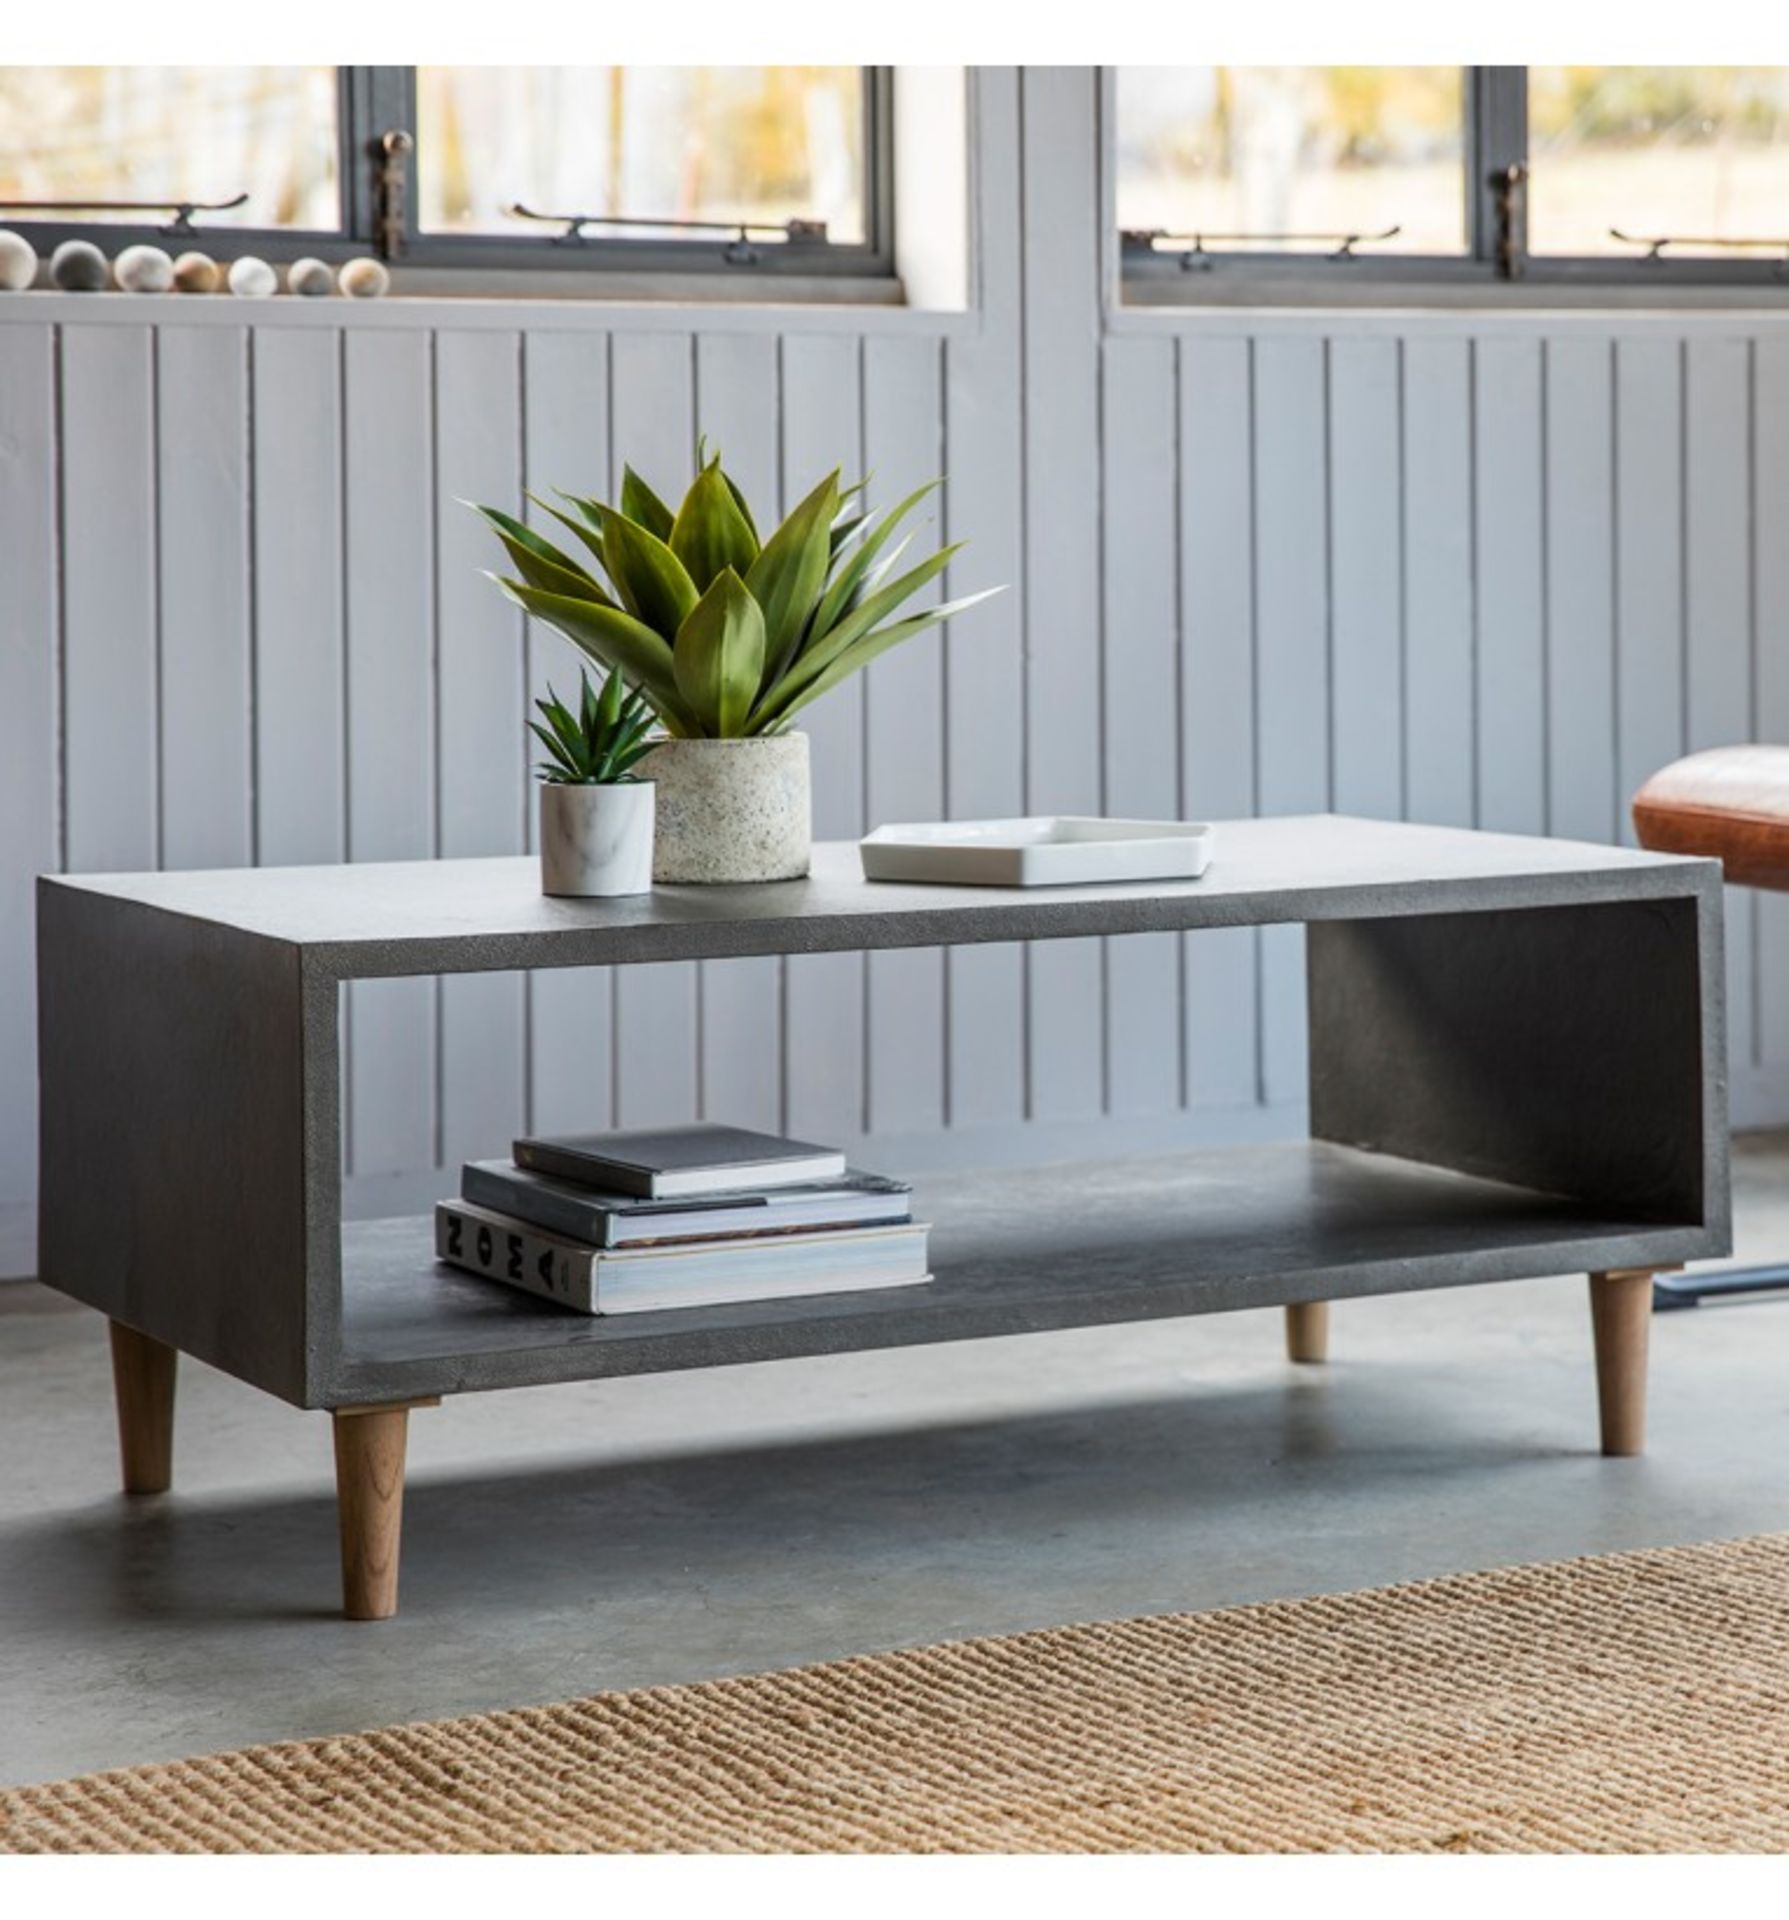 Bergen Cube Coffee Table The Bergen cubed coffee table has a modern meets industrial design in a